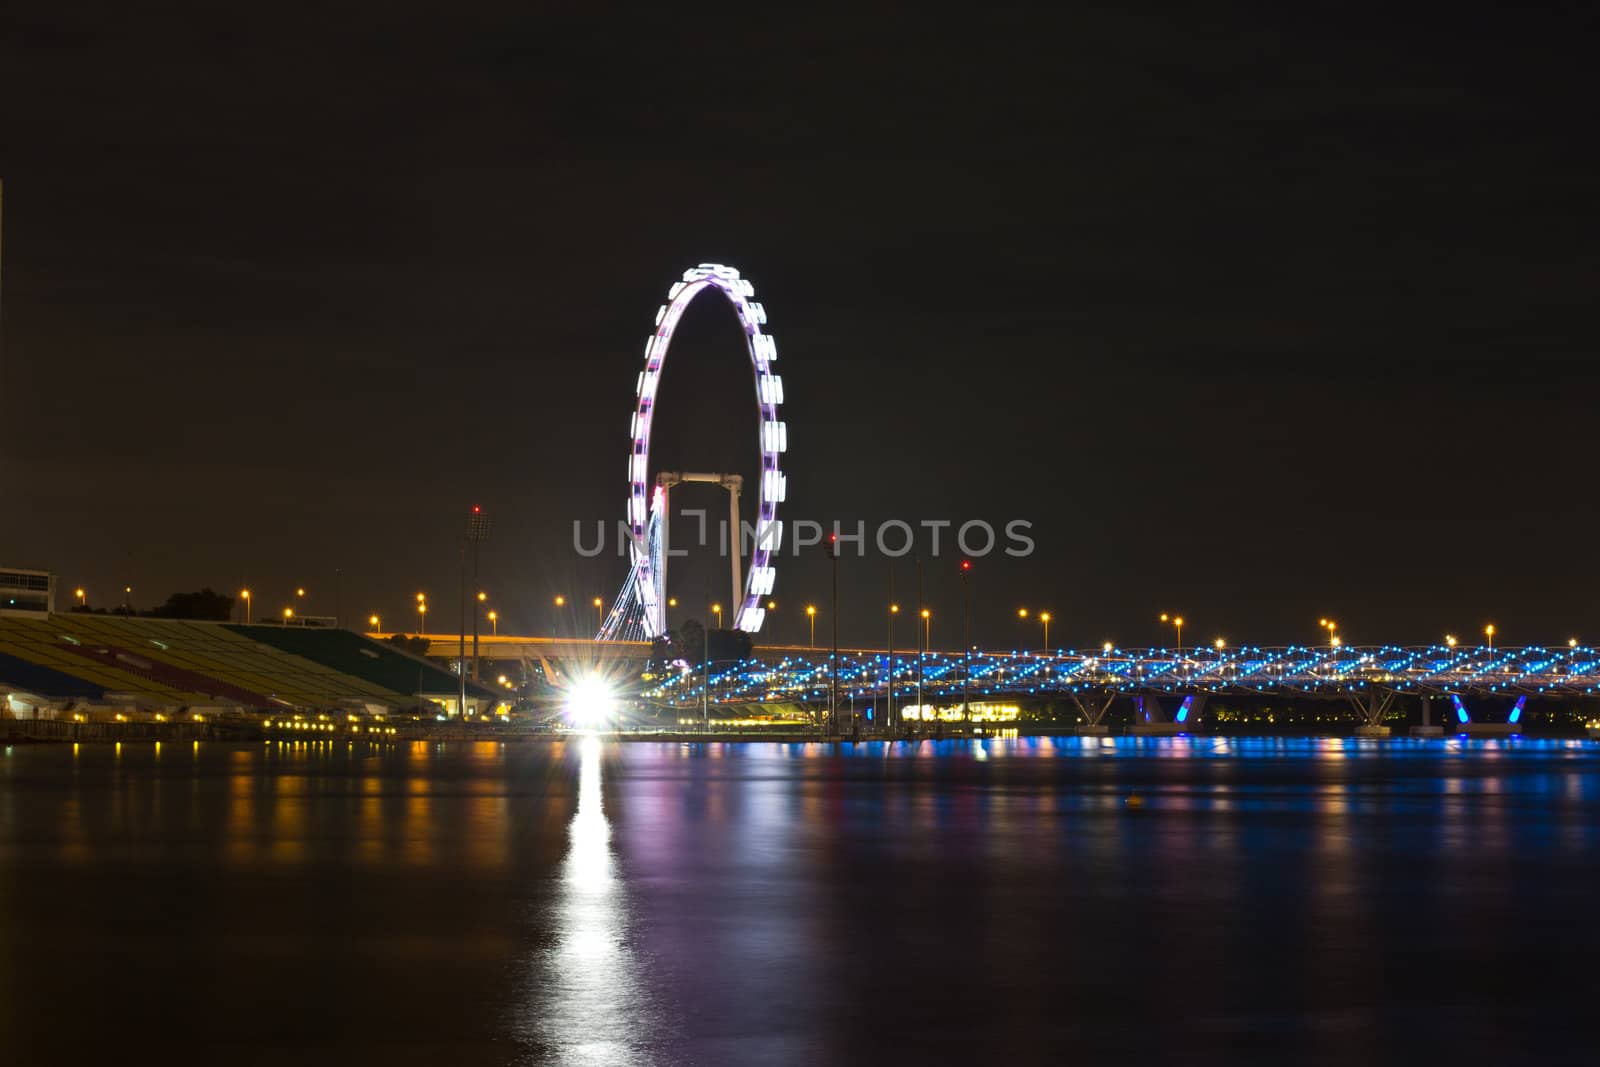 singapore flyer that biggest in the world